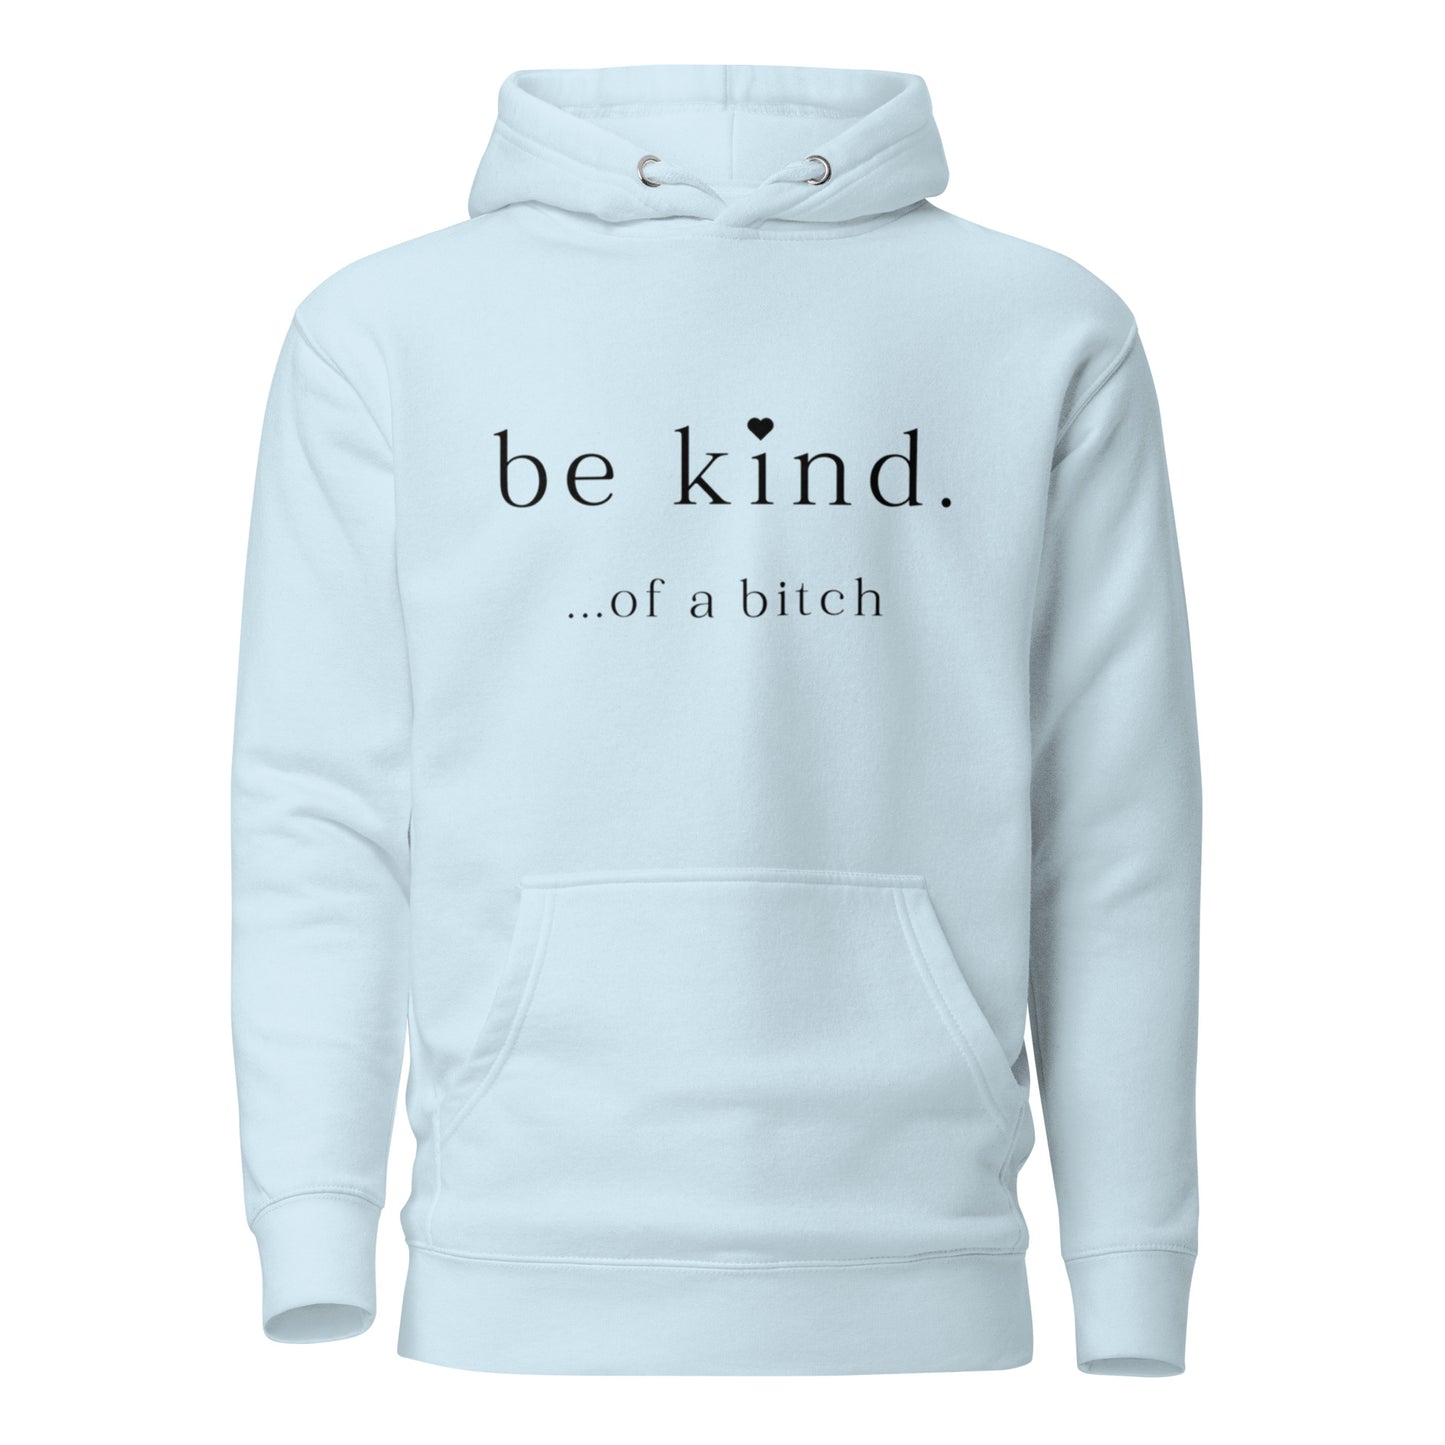 Be Kind...of a bitch Unisex Hoodie